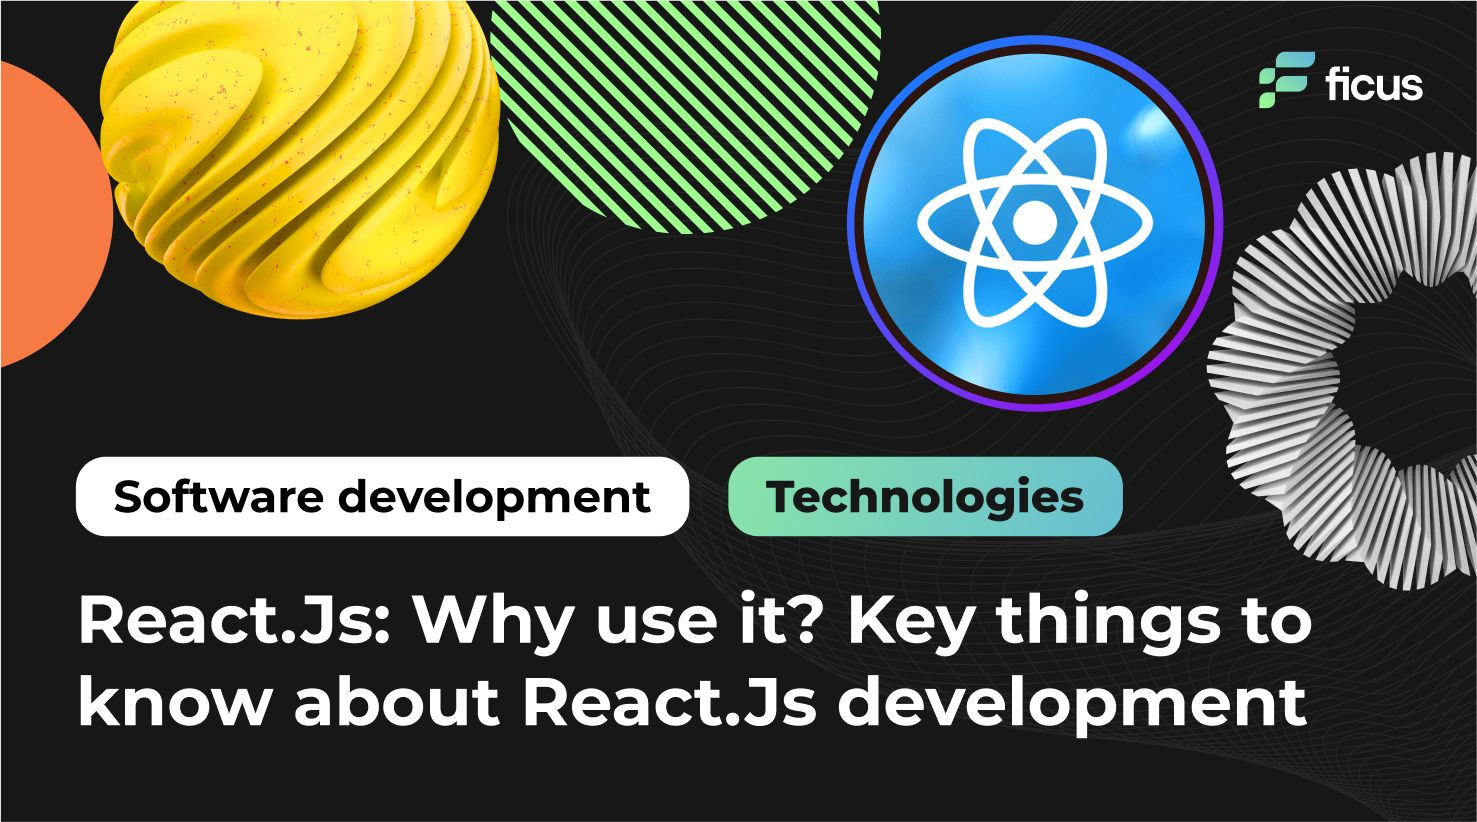 React.Js: Why use it? Key things to know about React.Js development